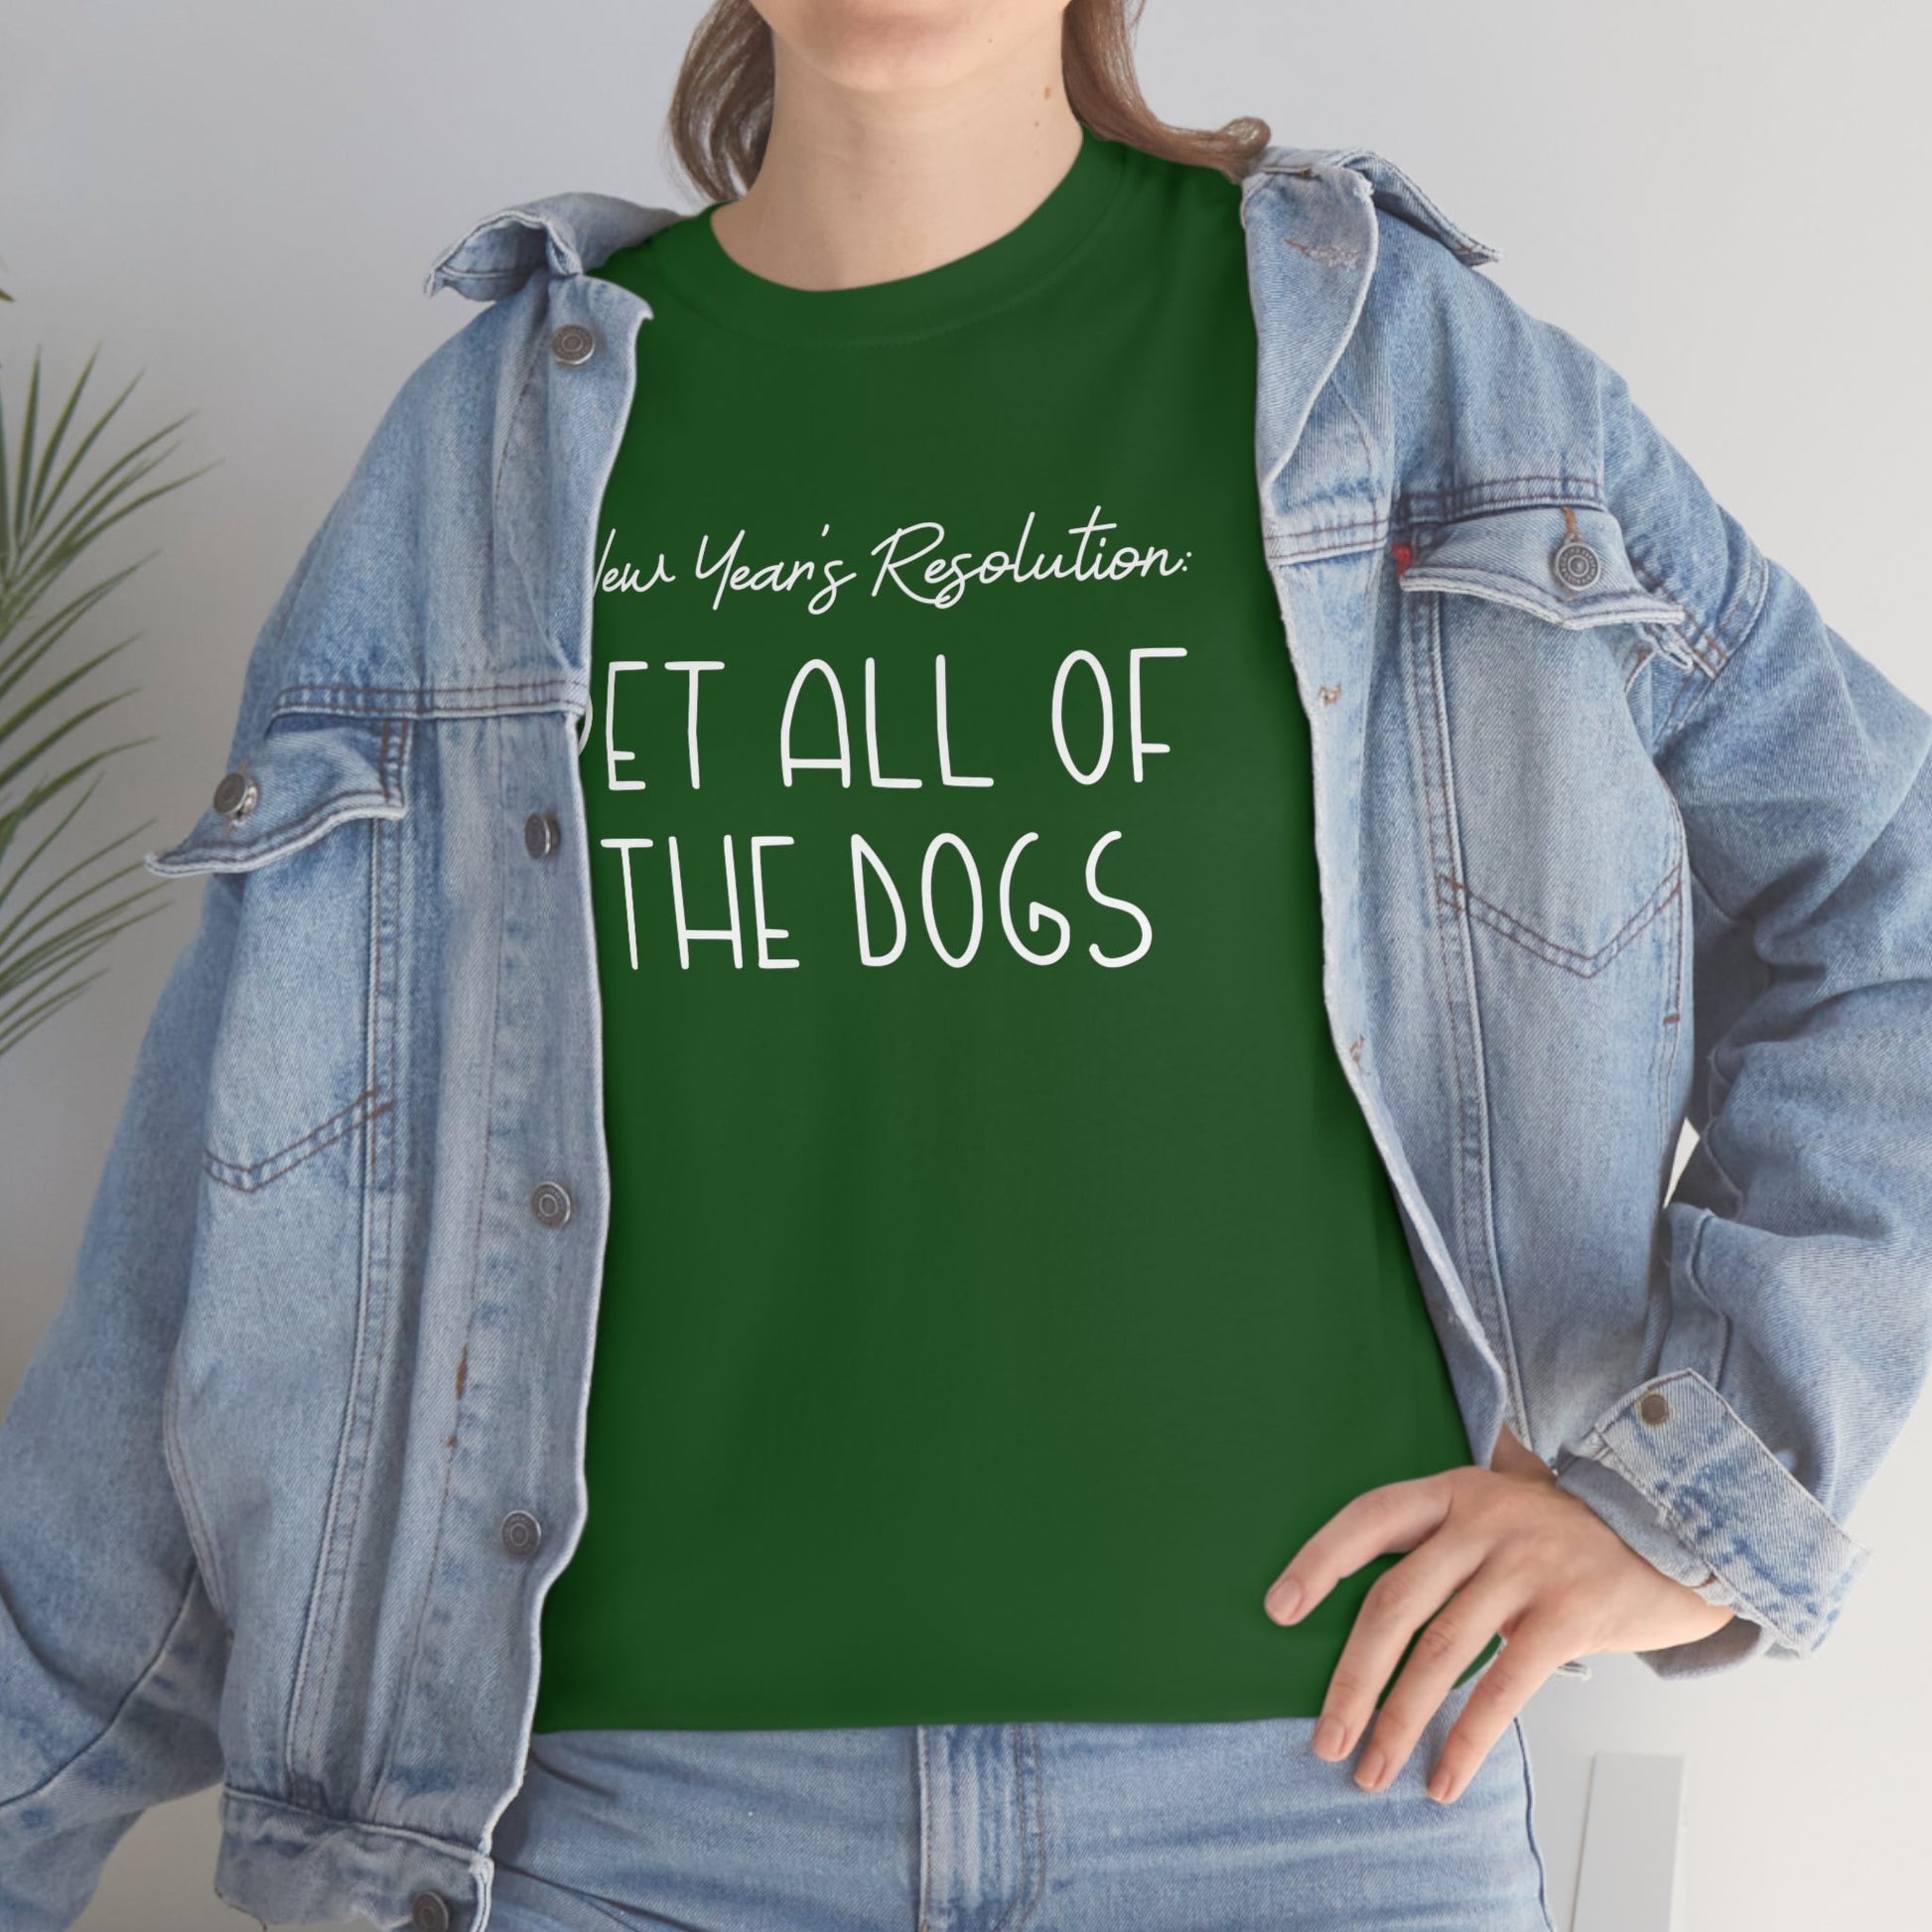 New Year's Resolution: Pet All Of The Dogs | Text Tees - Detezi Designs-10532455646828299245